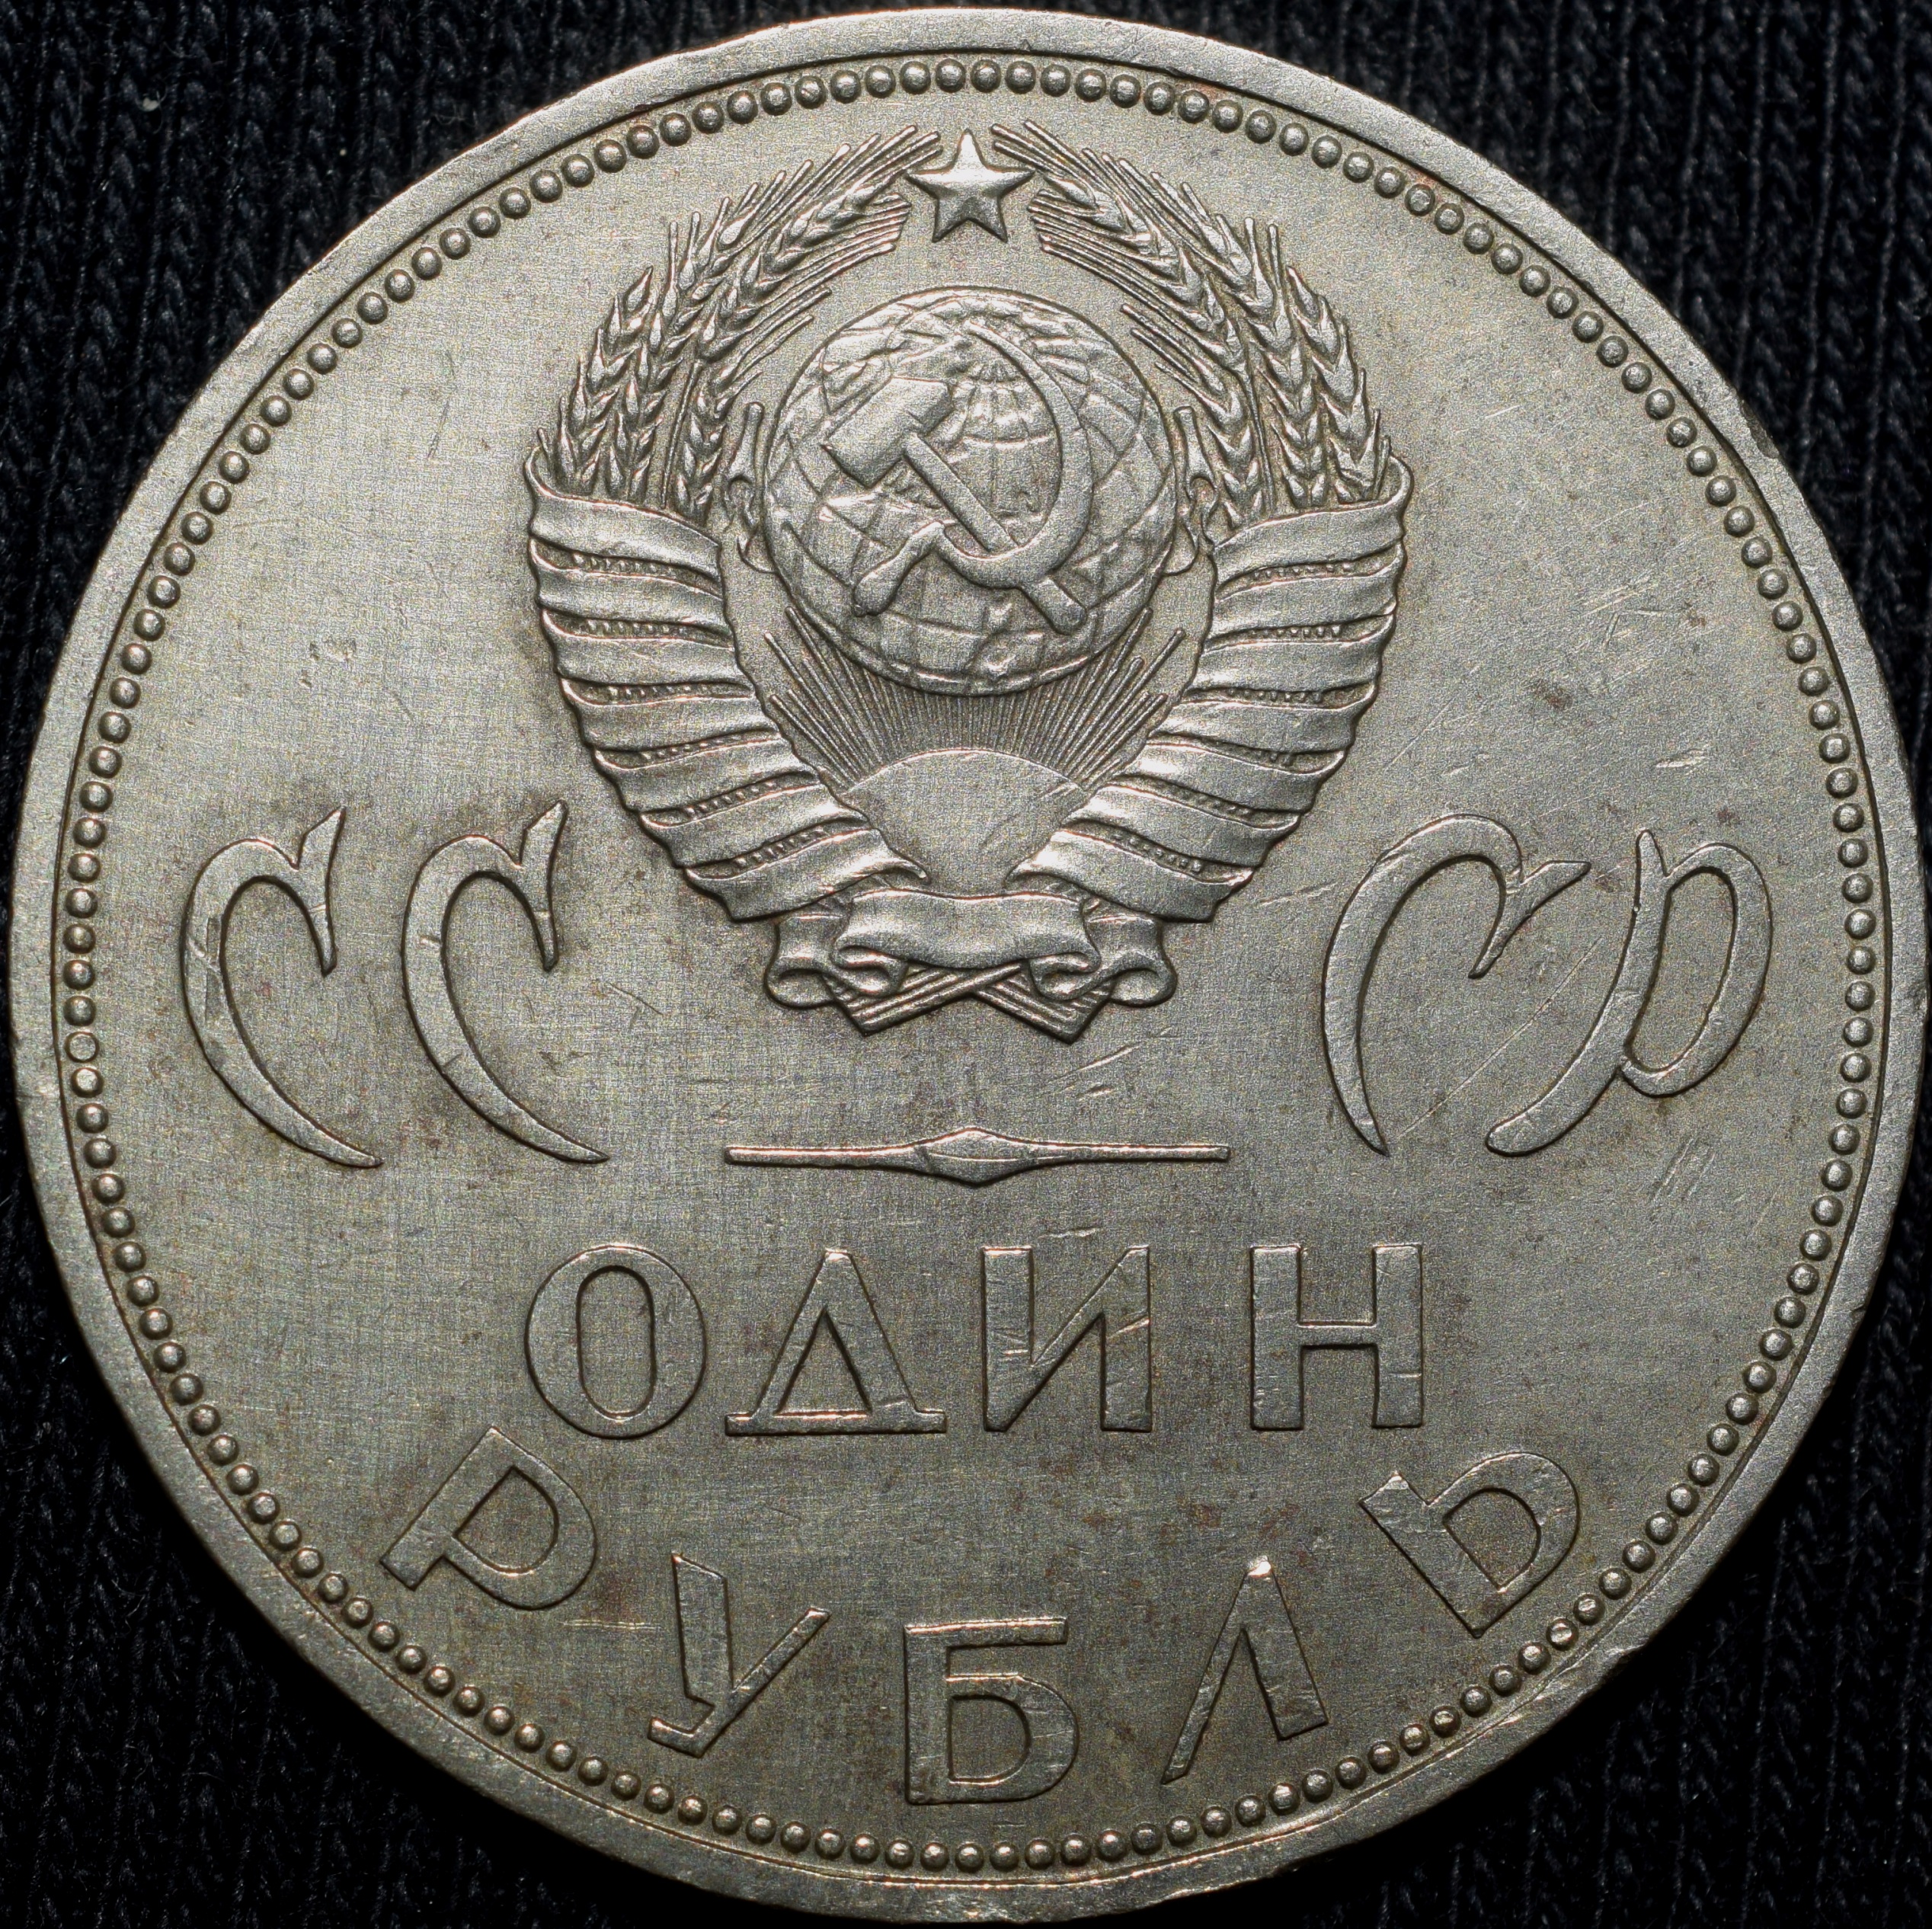 Nickel-Silver 1 Rouble of Russia Country (AD 1965) 20th